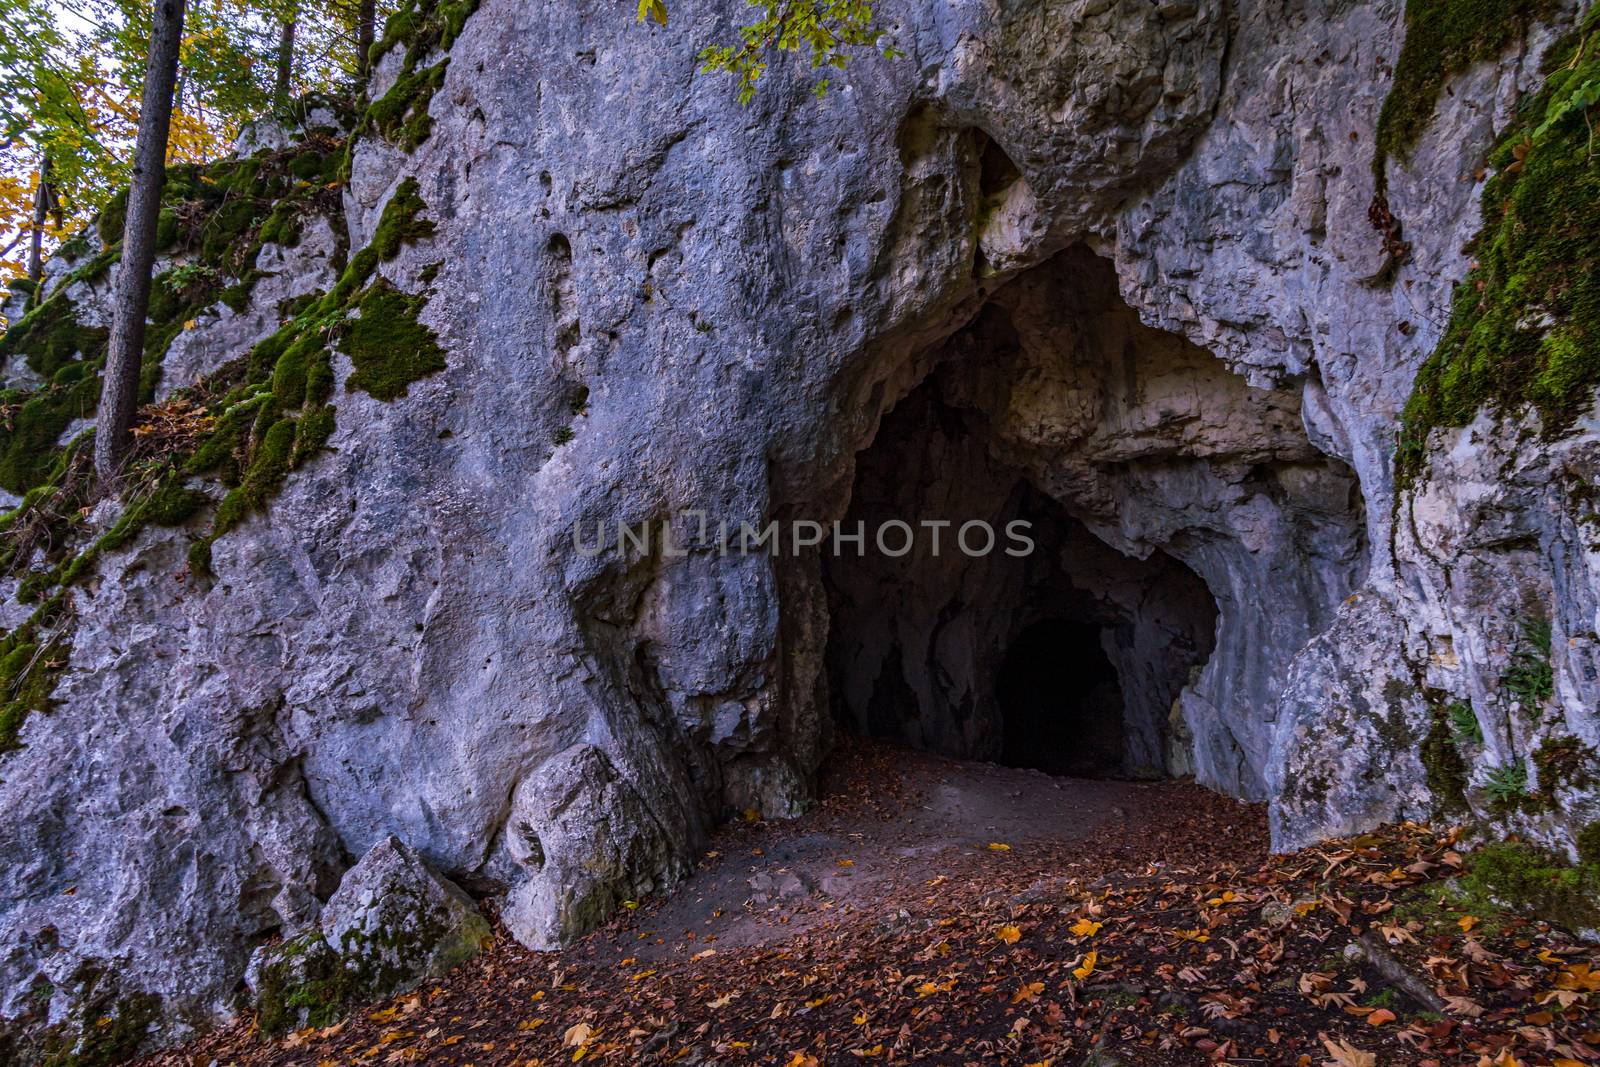 The Sperberloch at the Jagerhaus a cave in the Danube valley near Beuron in the Sigmaringen district